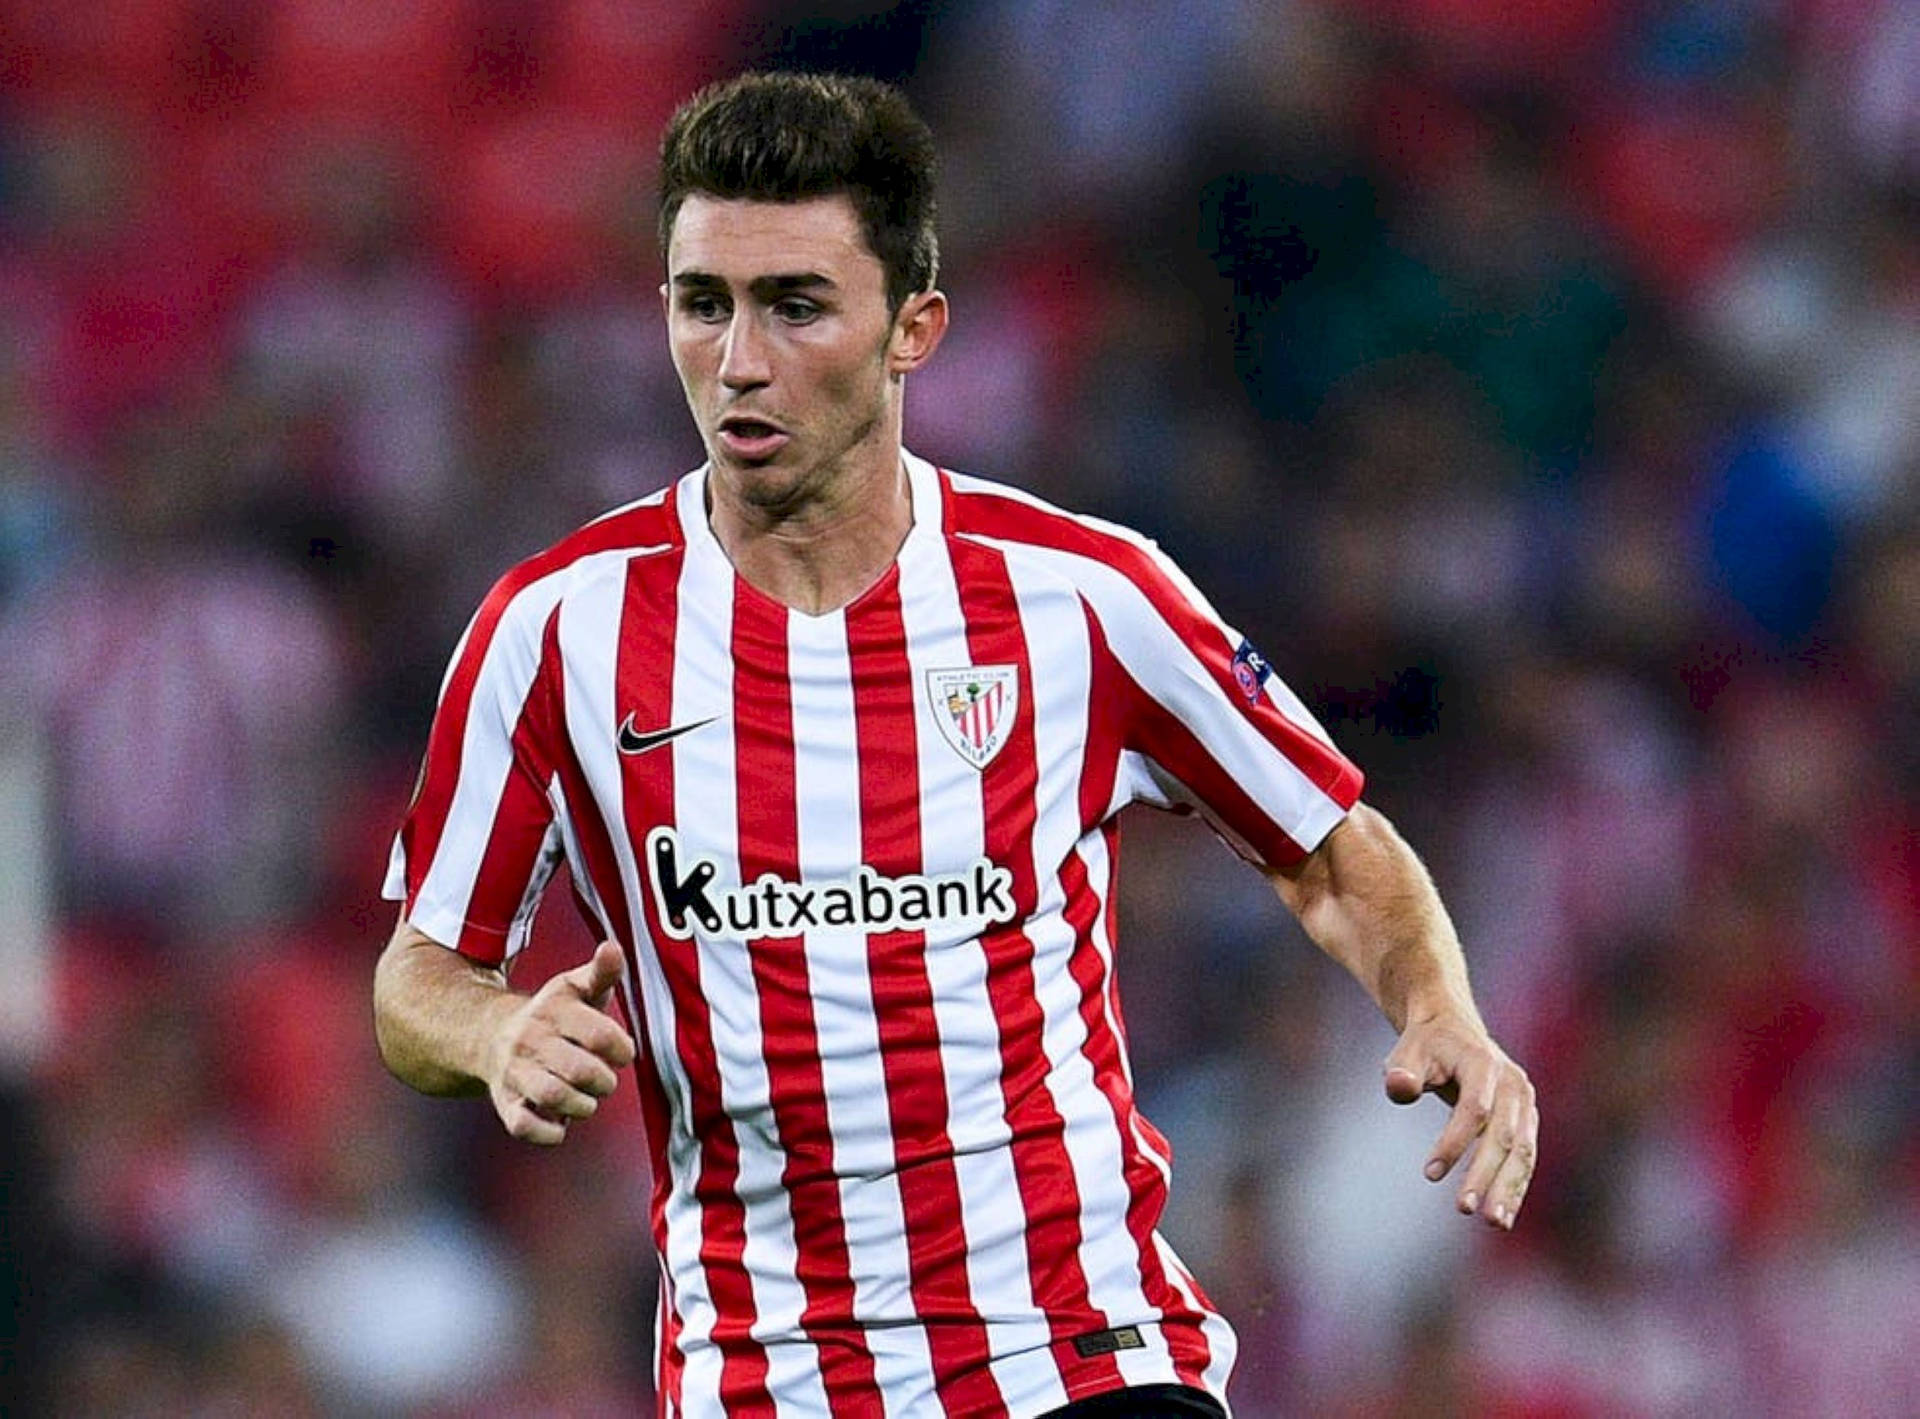 Aymeric Laporte In Striped Jersey Wallpaper